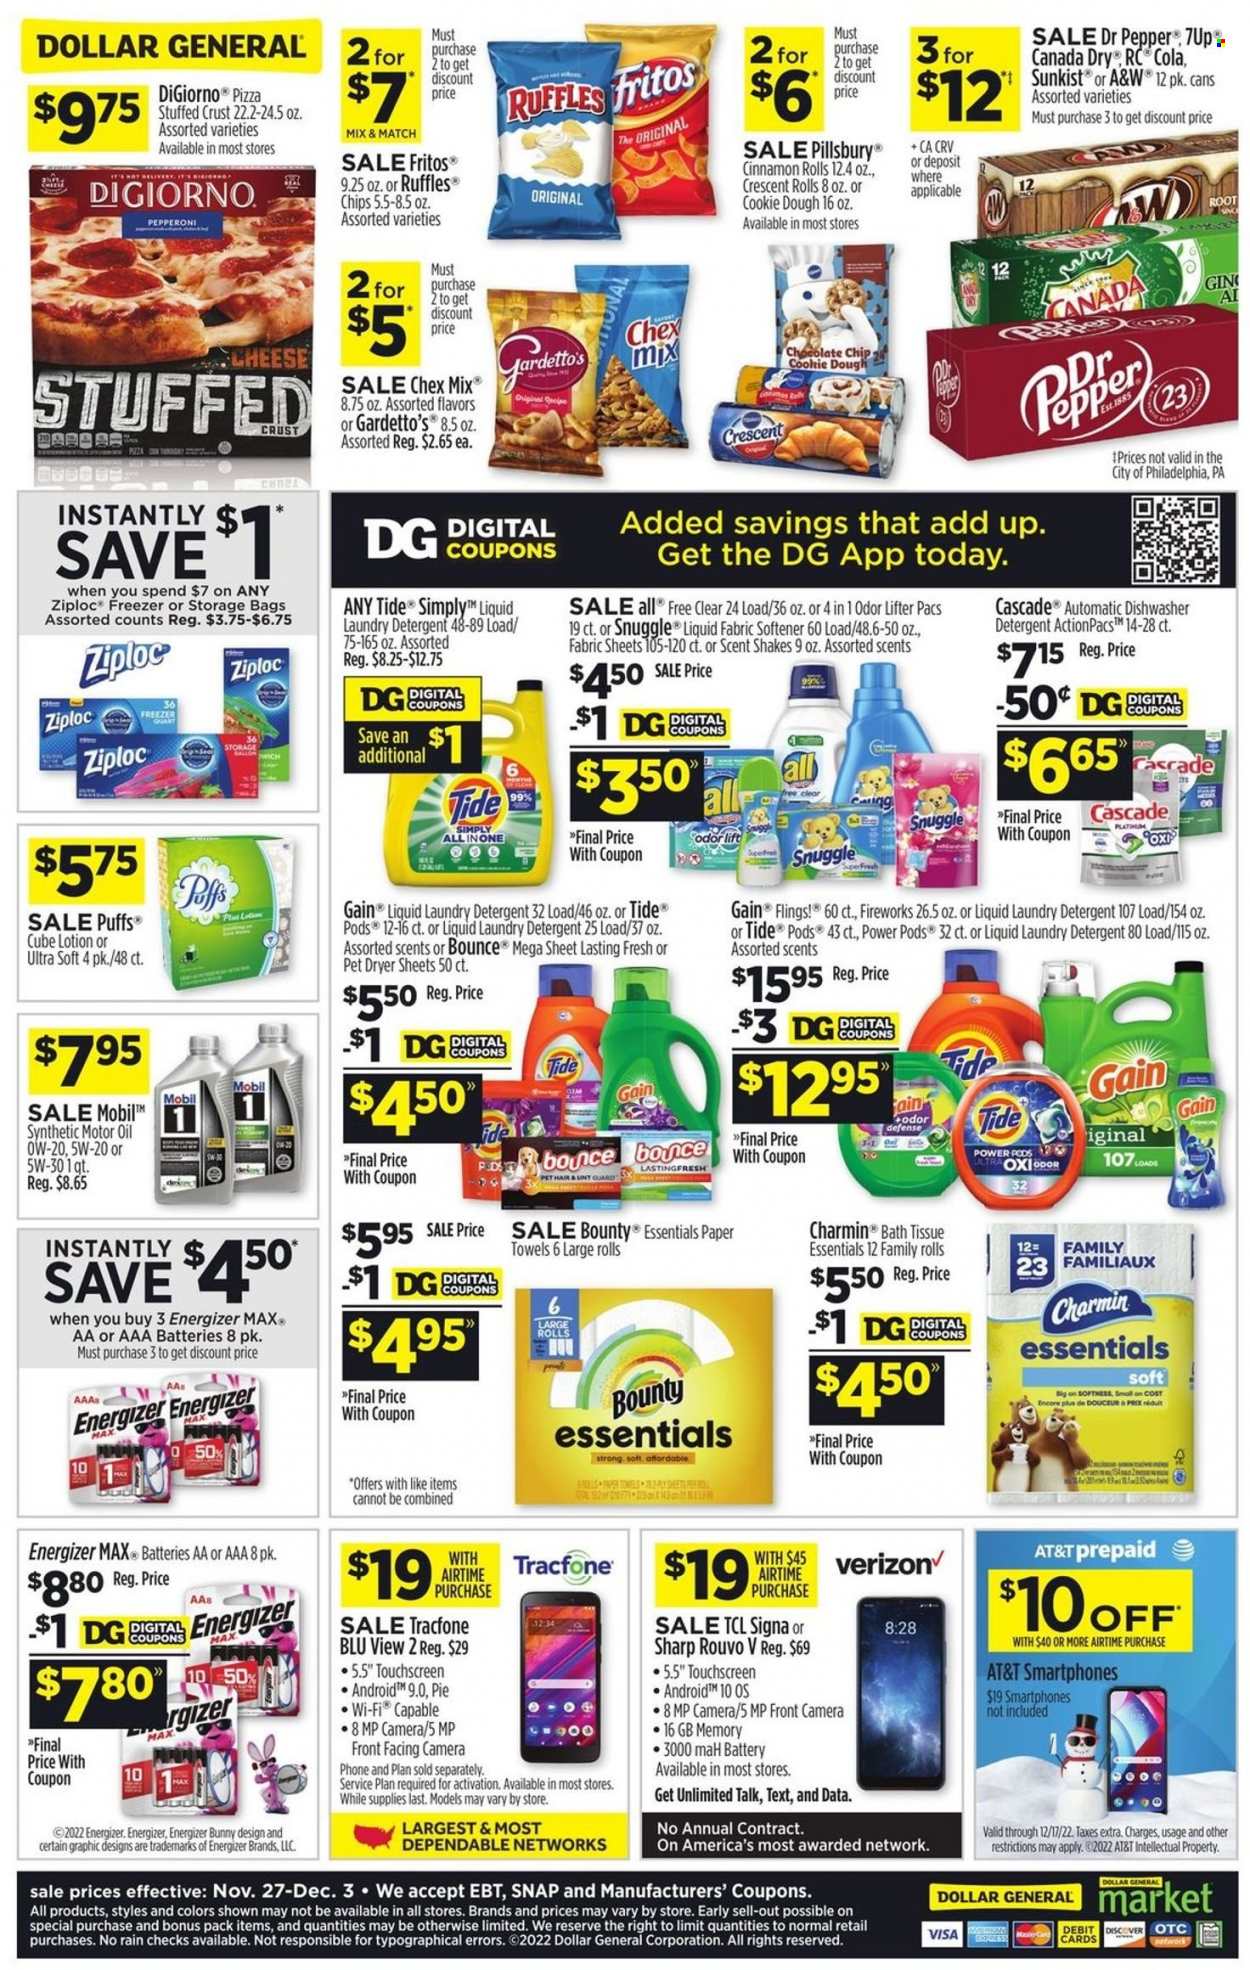 thumbnail - Dollar General Flyer - 11/27/2022 - 12/03/2022 - Sales products - puffs, cinnamon roll, crescent rolls, pizza, Pillsbury, pepperoni, shake, cookie dough, Bounty, Fritos, chips, Ruffles, Chex Mix, oil, Canada Dry, Dr. Pepper, 7UP, A&W, gin, bath tissue, kitchen towels, paper towels, Charmin, detergent, Gain, Cascade, Snuggle, Tide, fabric softener, laundry detergent, Bounce, dryer sheets, Ziploc, Sharp, Energizer, TCL, phone, freezer, hat, Mobil, motor oil. Page 2.